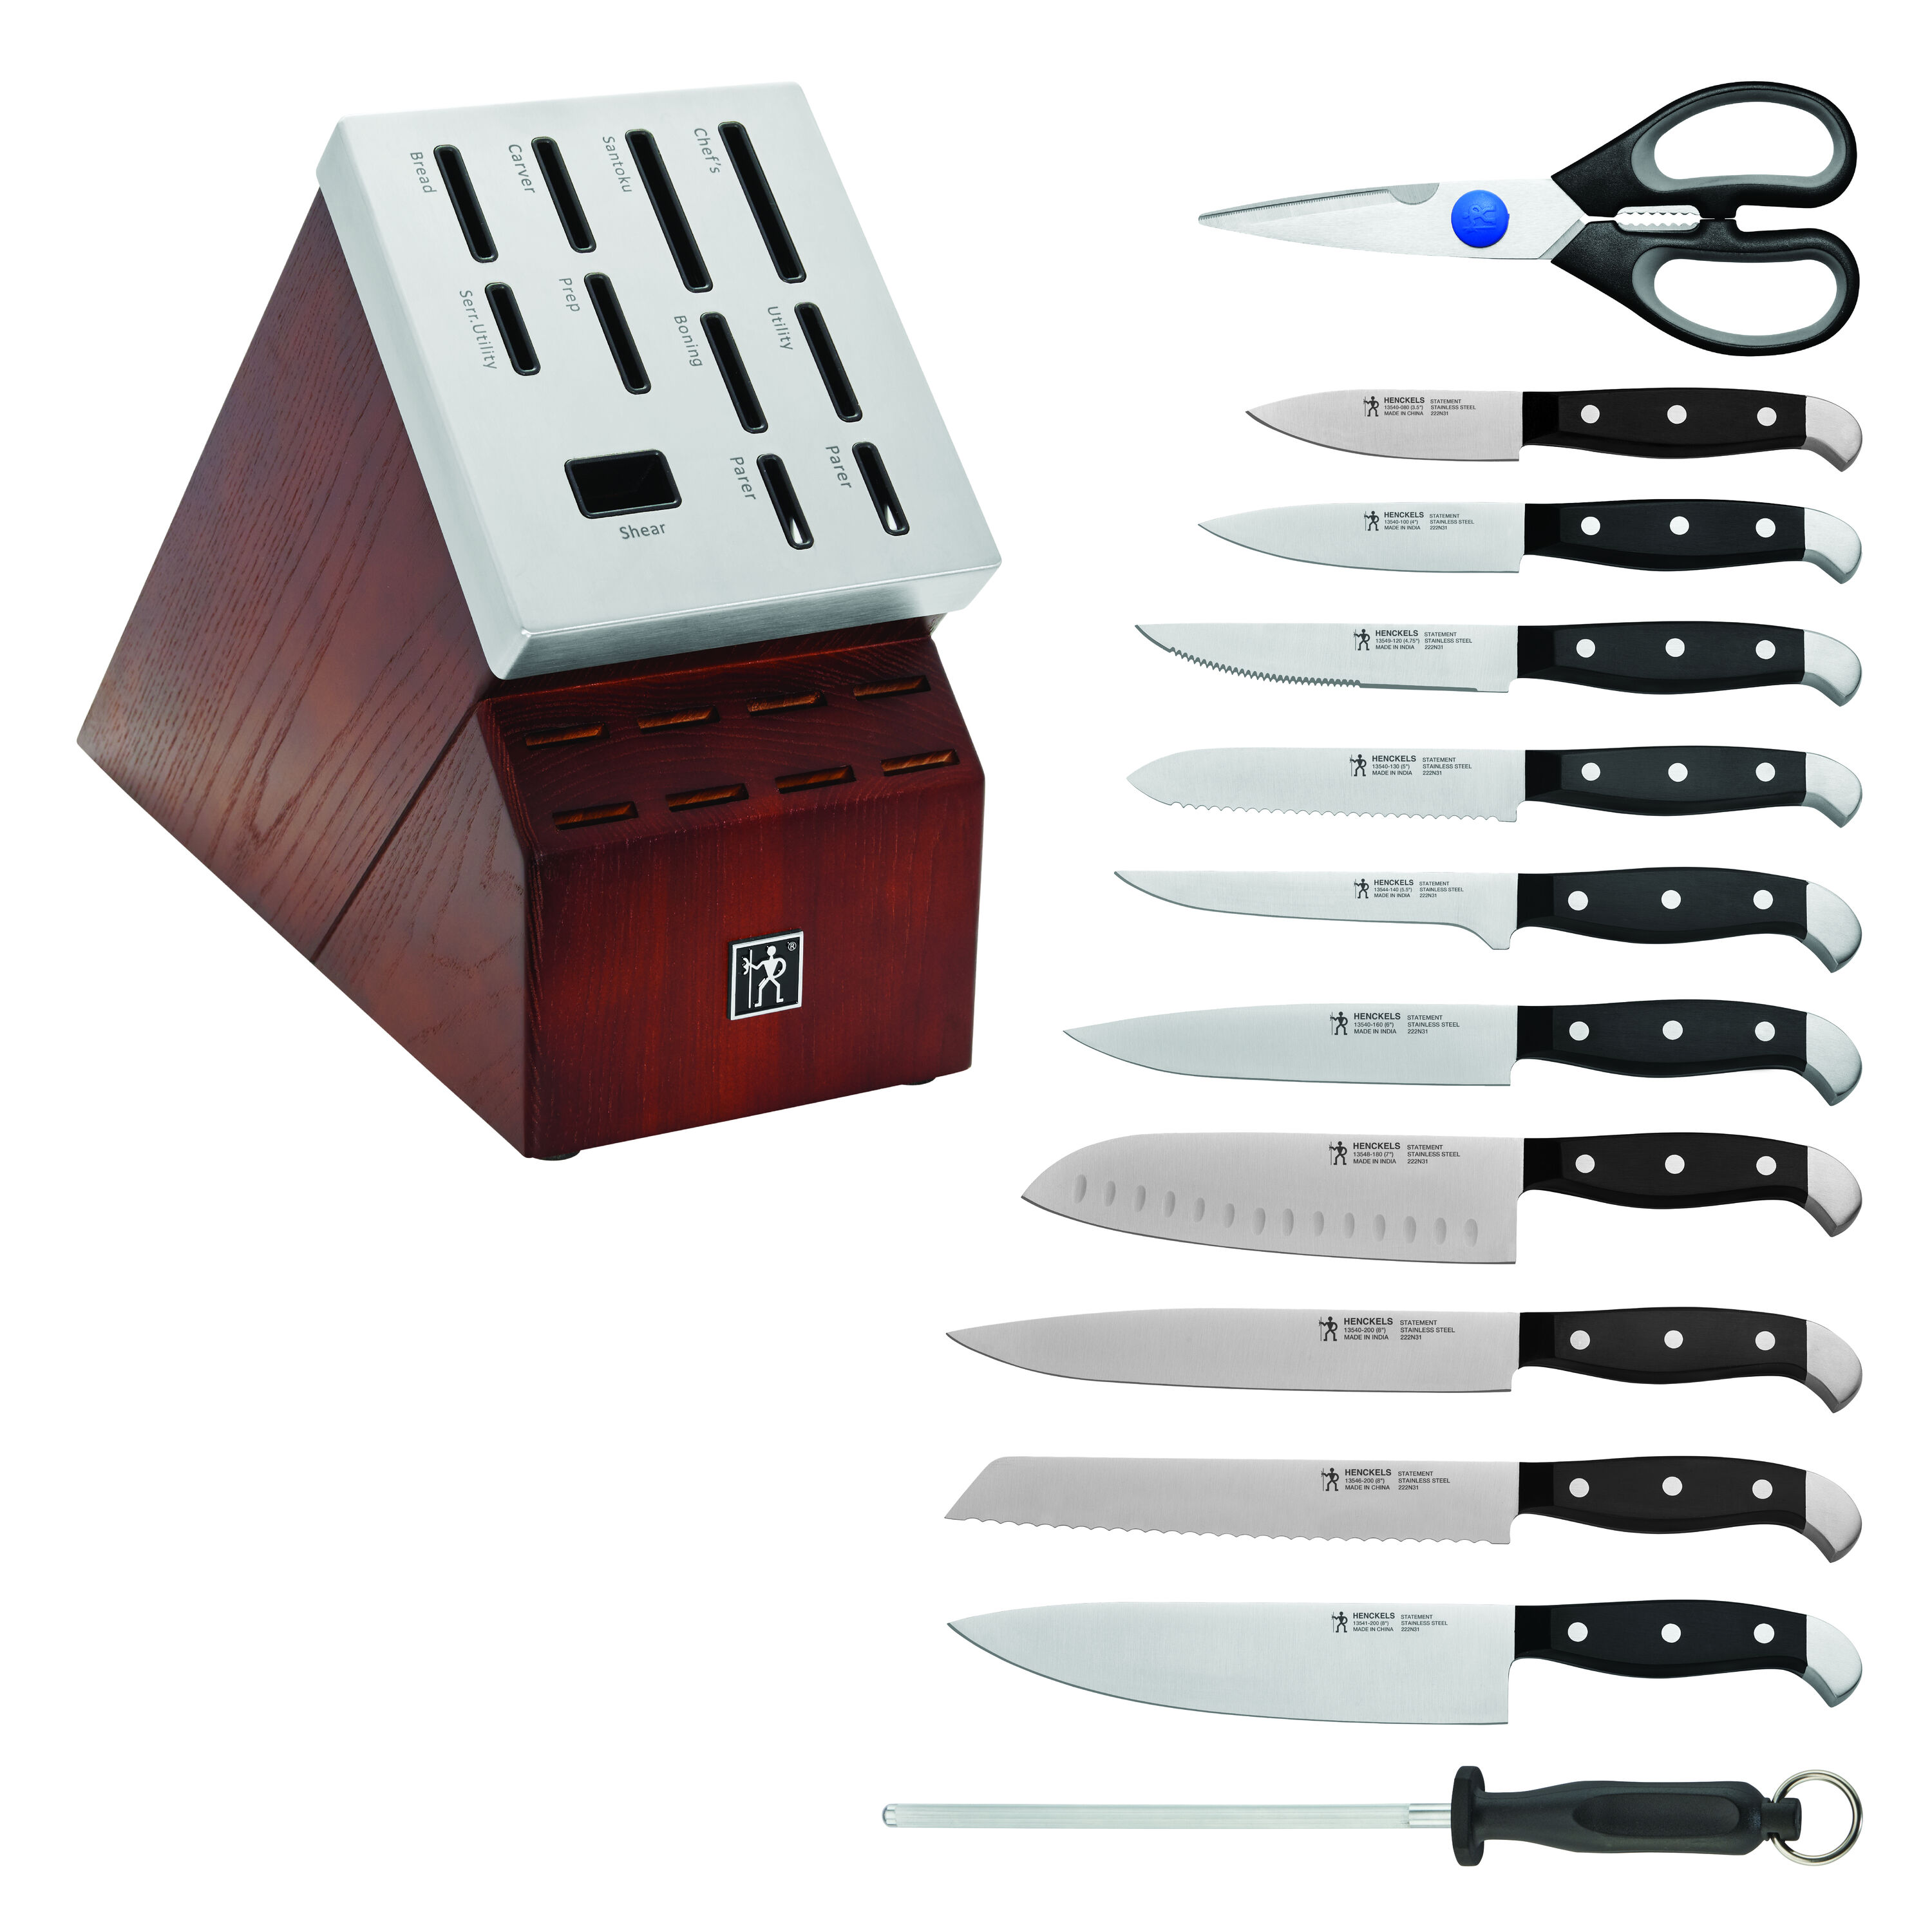 Henckels Statement 20-pc Self-Sharpening Knife Set with Block - Stainless